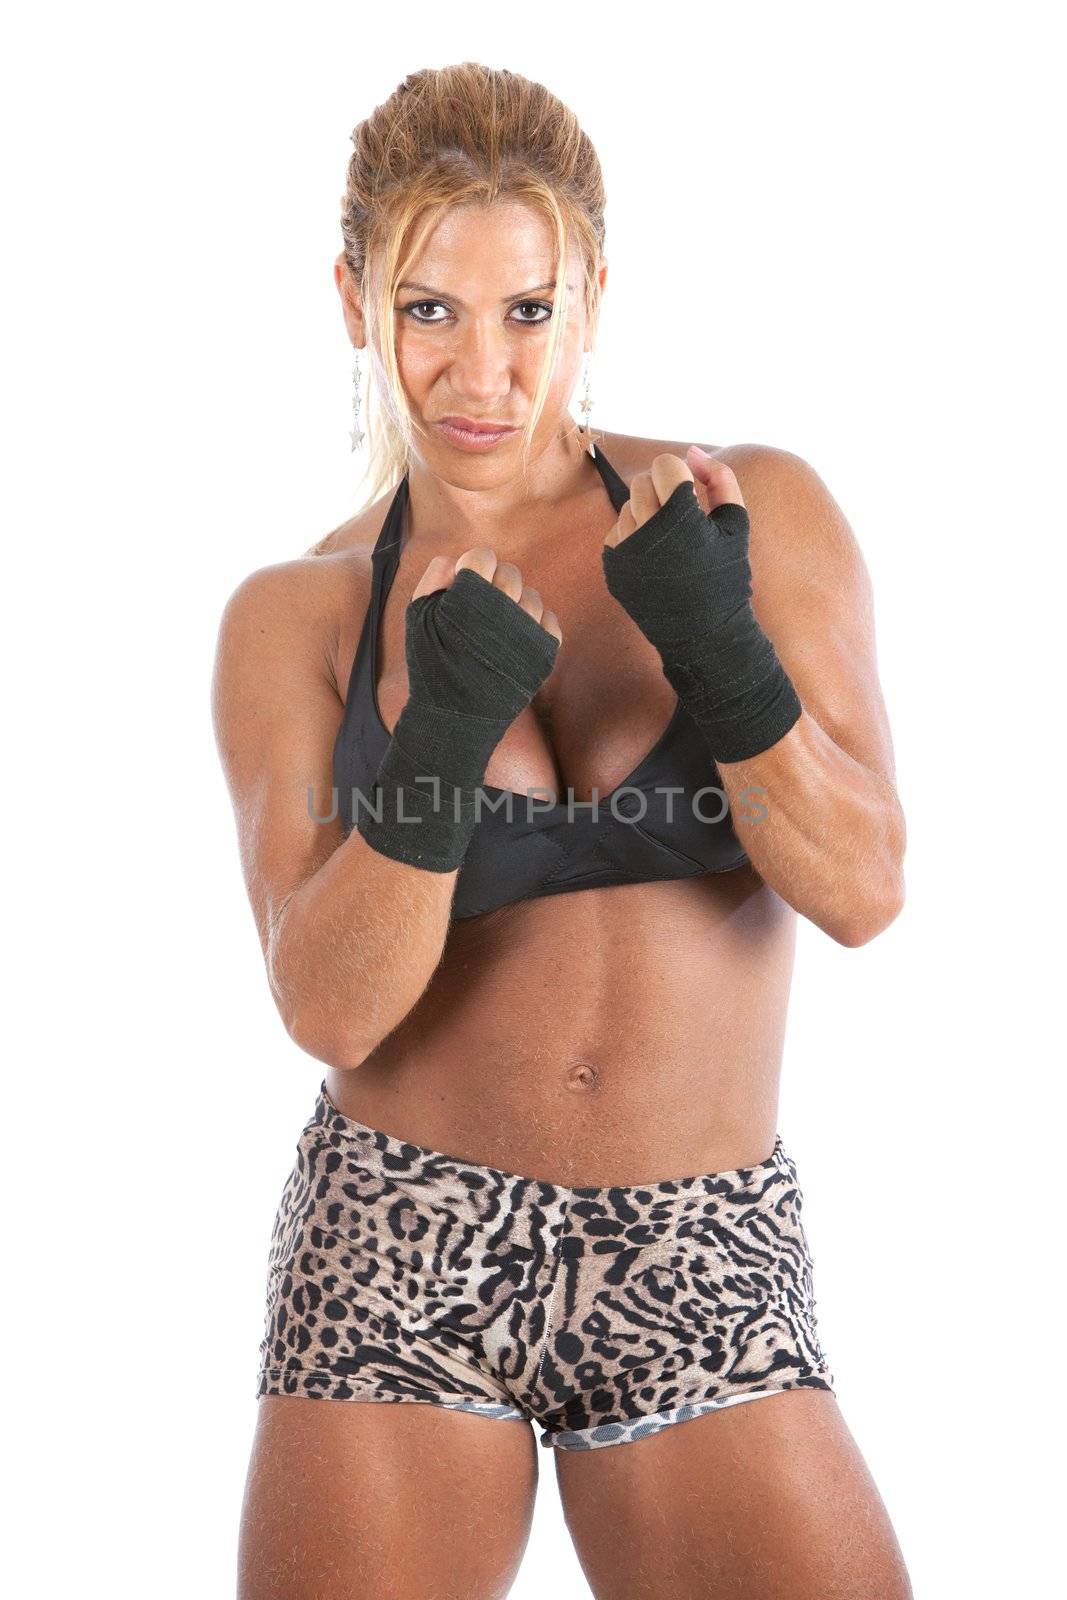 A blonde female bodybuilder isolated on a white background.   Image is part of a series.